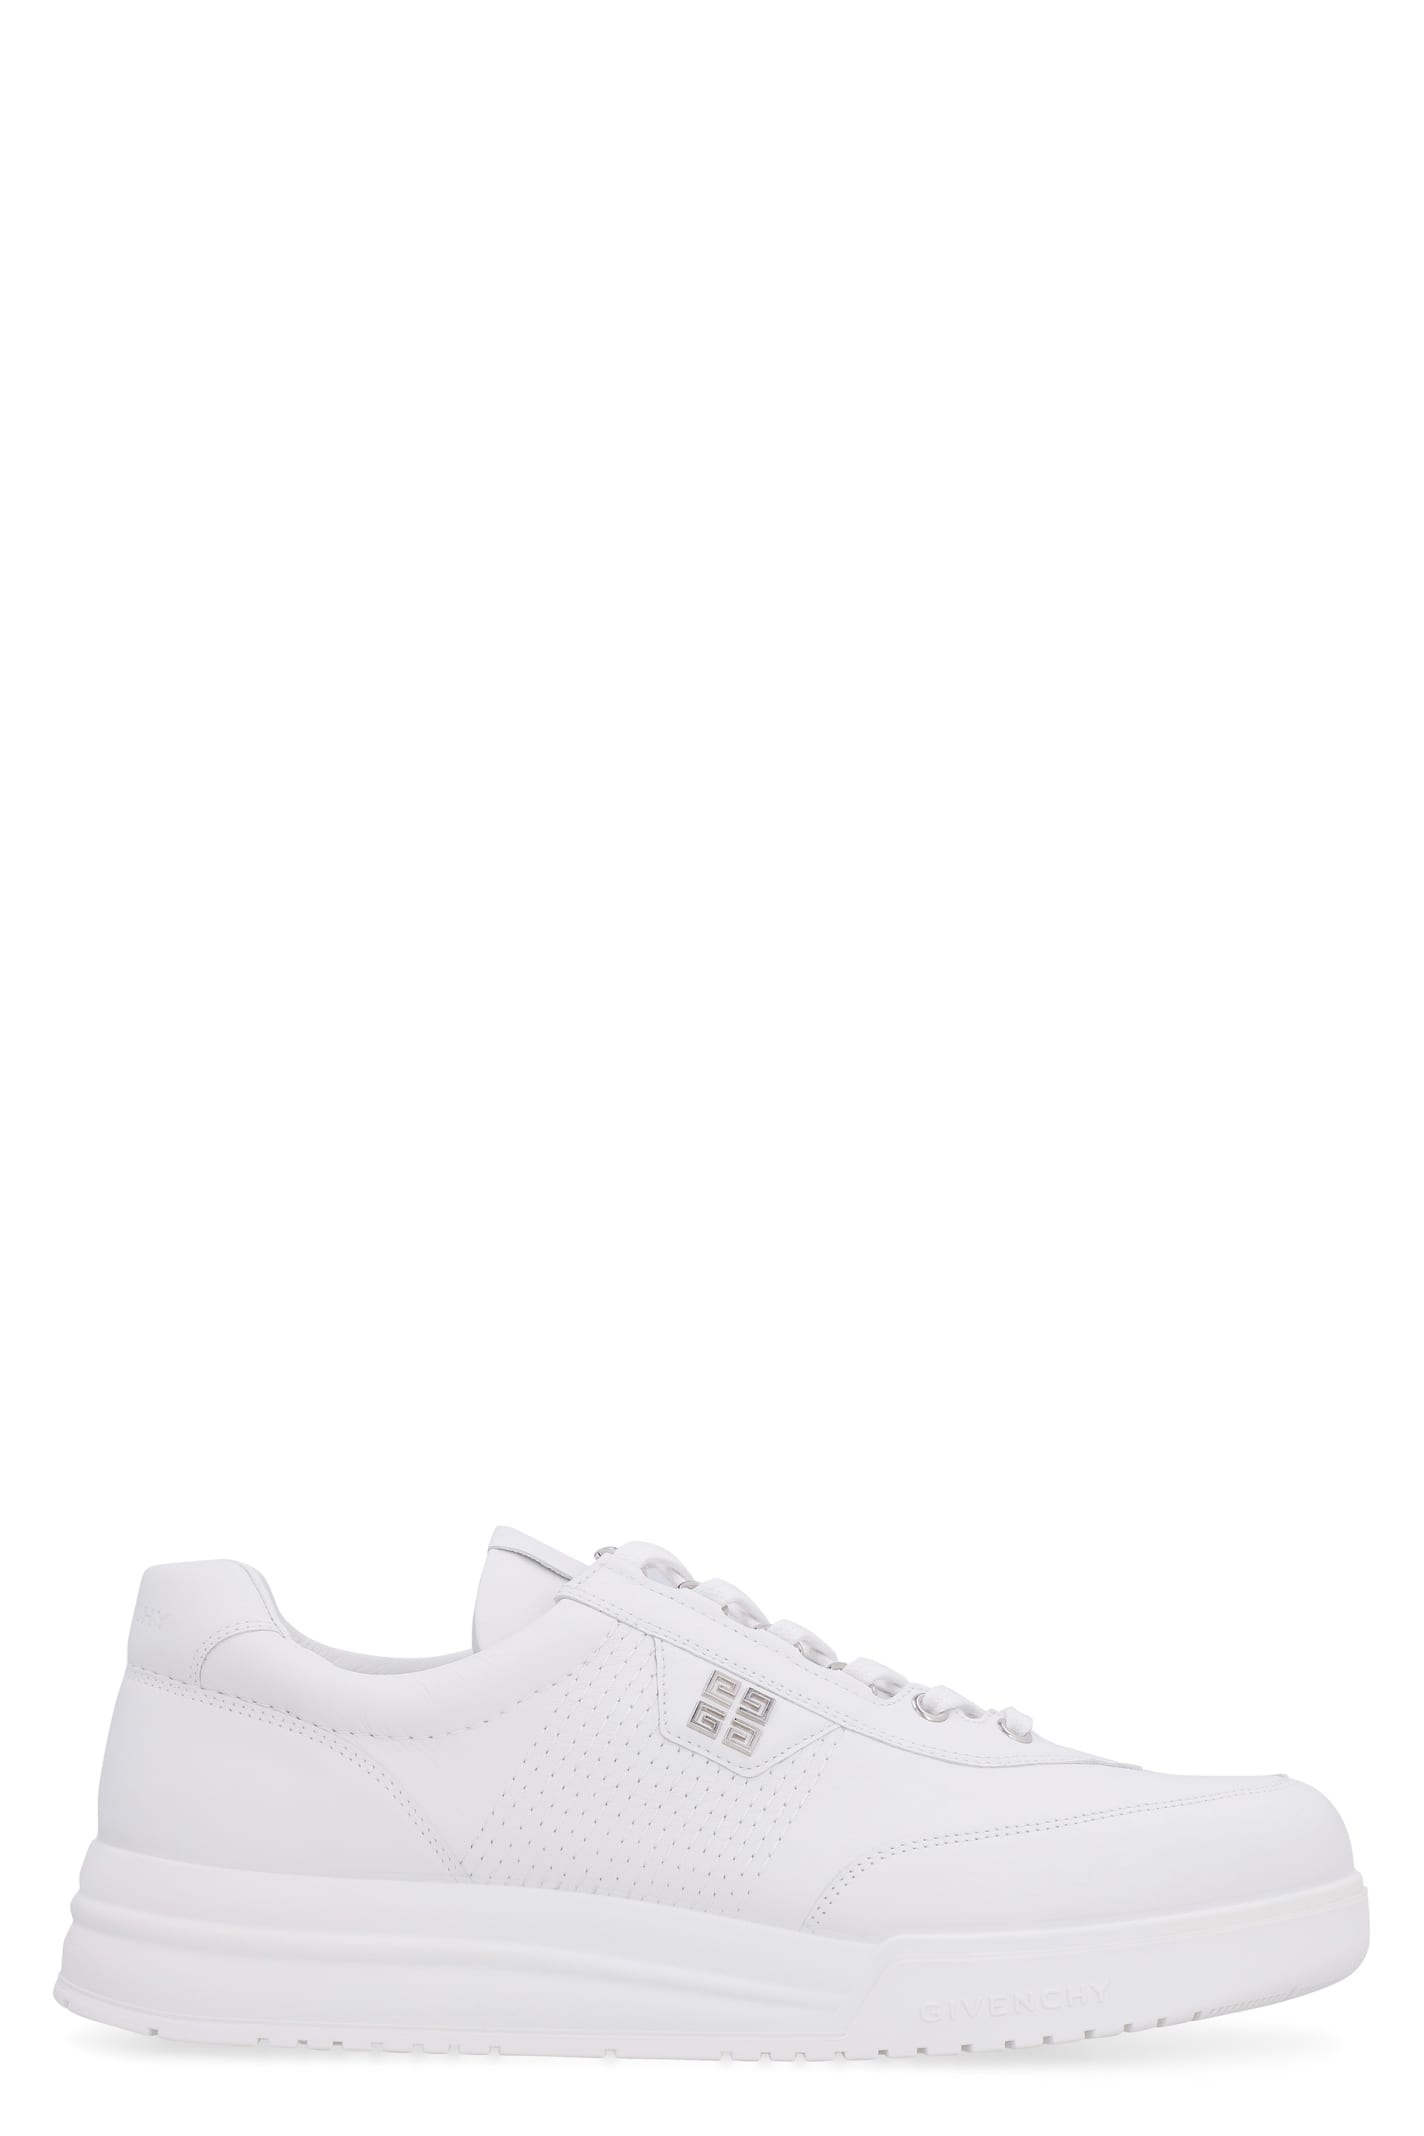 Givenchy G4 Leather Low-top Sneakers